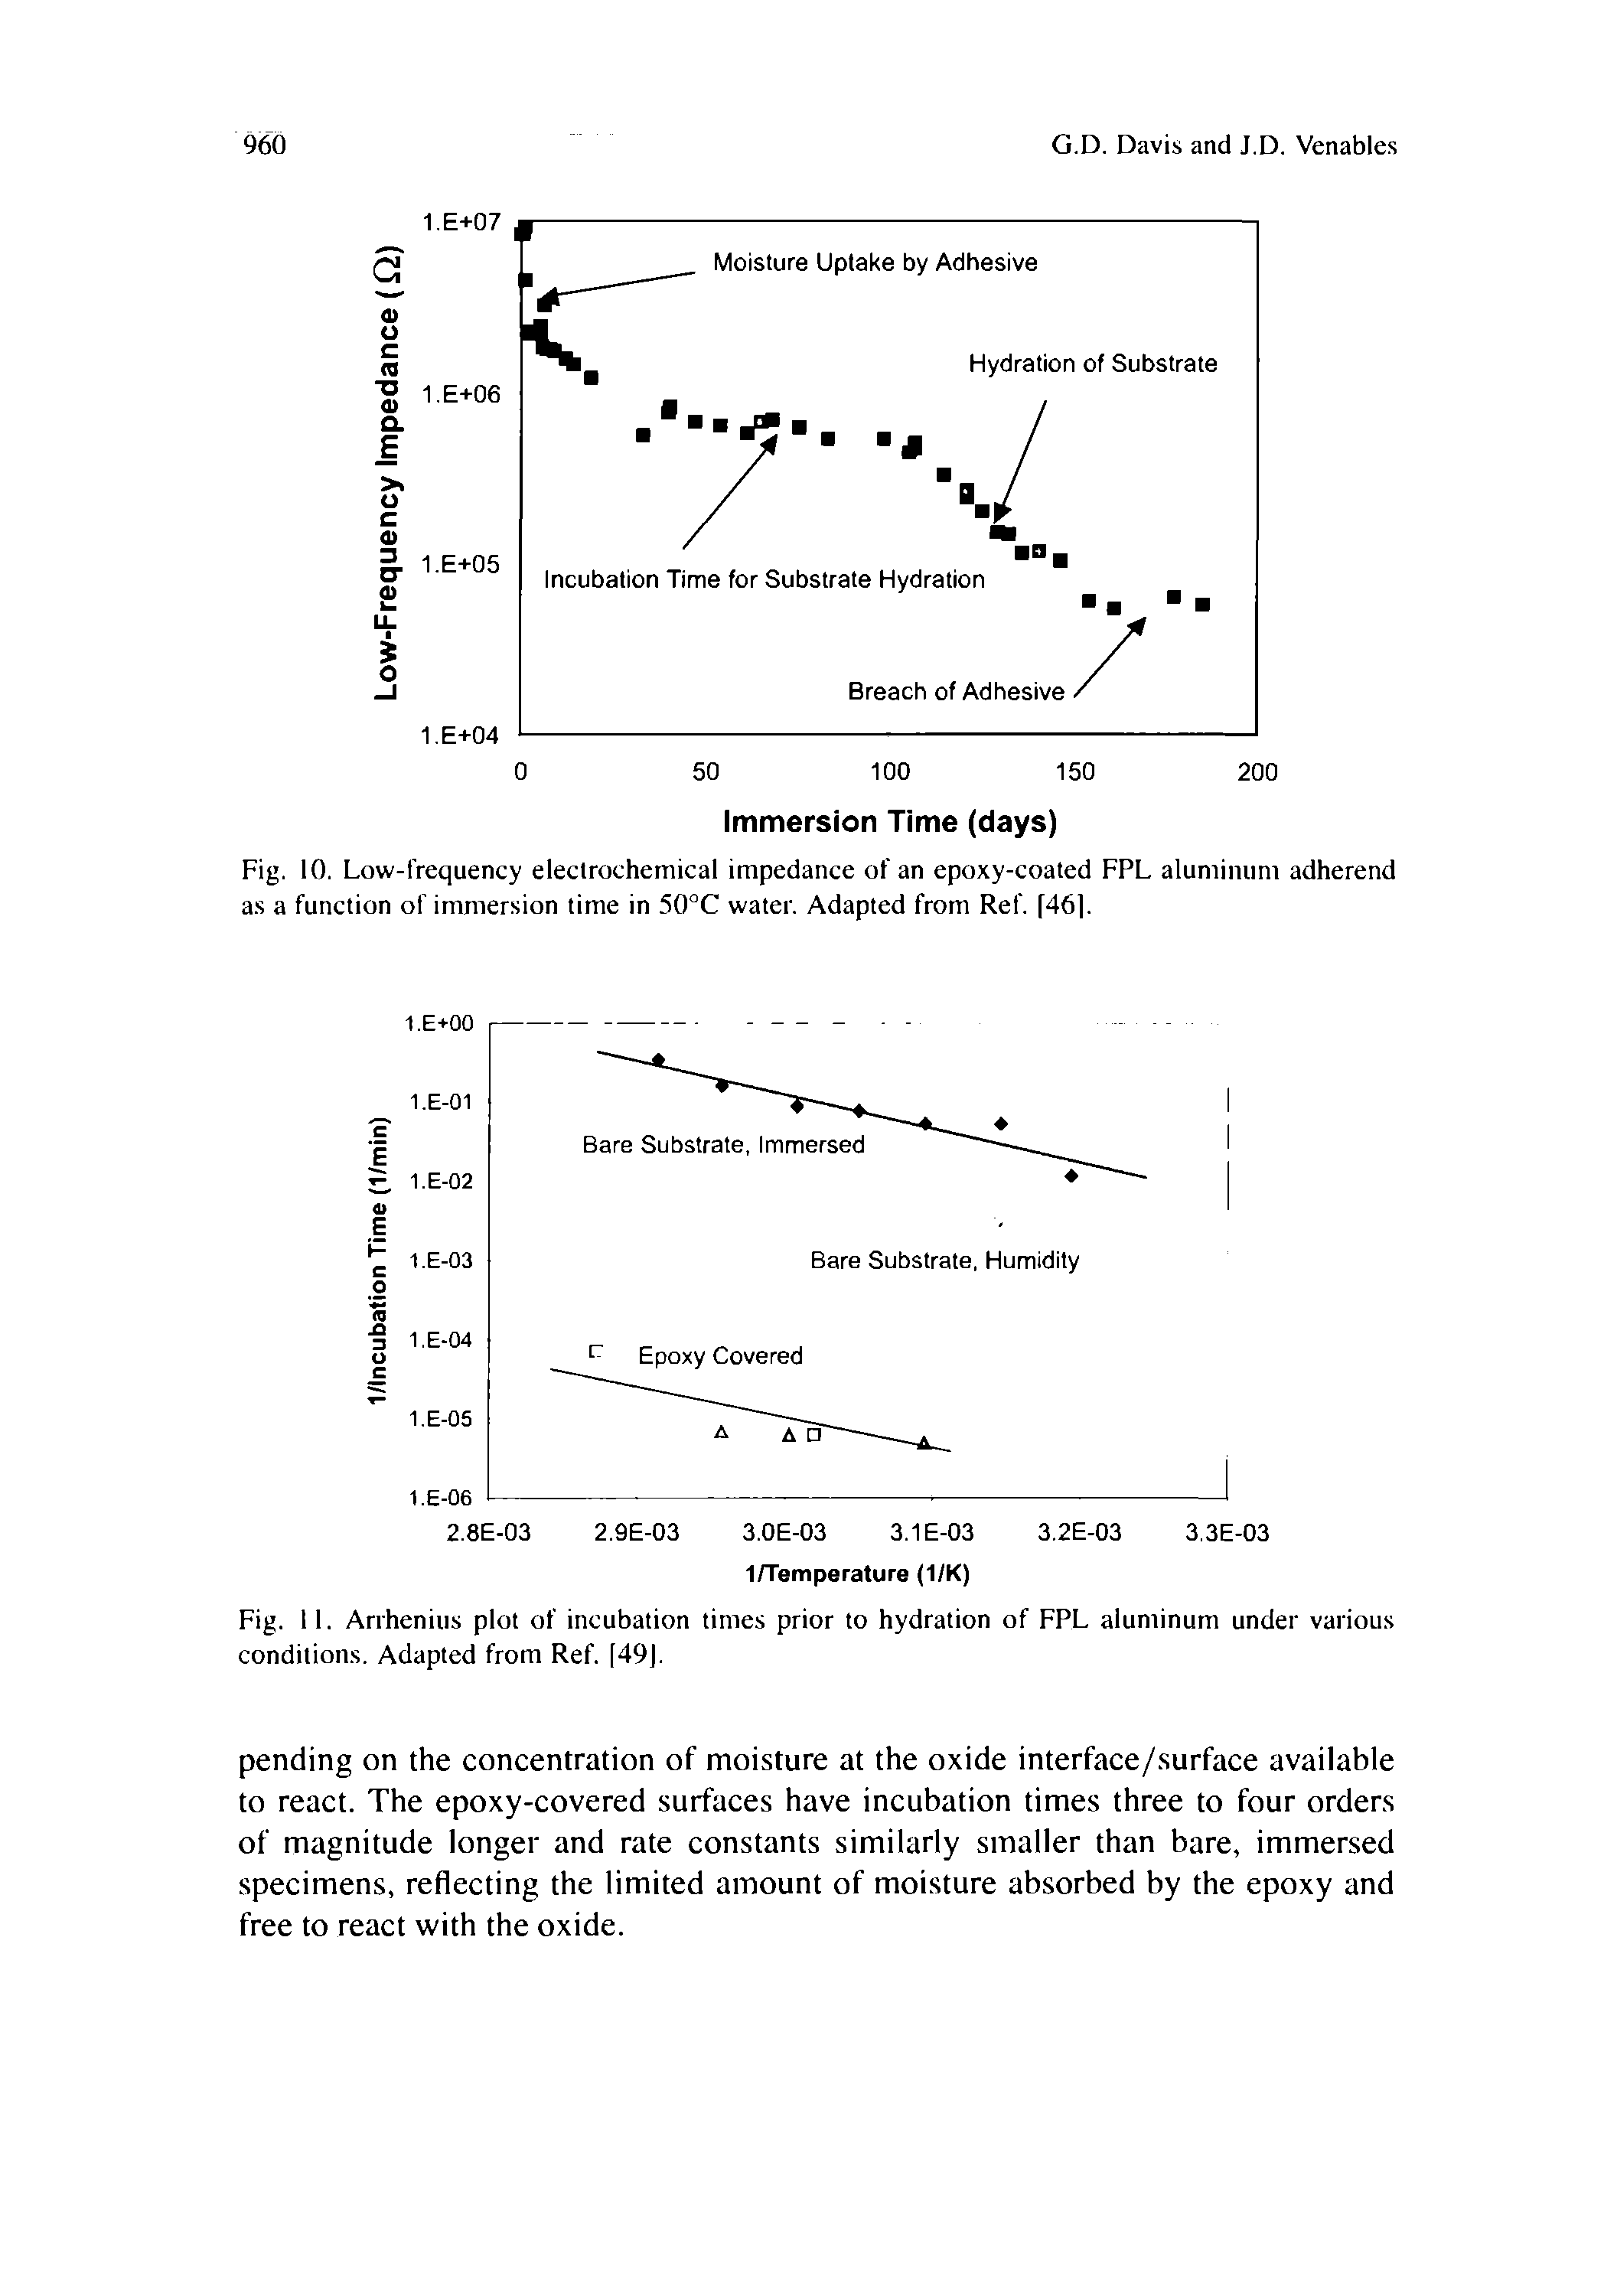 Fig. 11. Arrhenius plot of incubation times prior to hydration of FPL aluminum under various conditions. Adapted from Ref. [49).